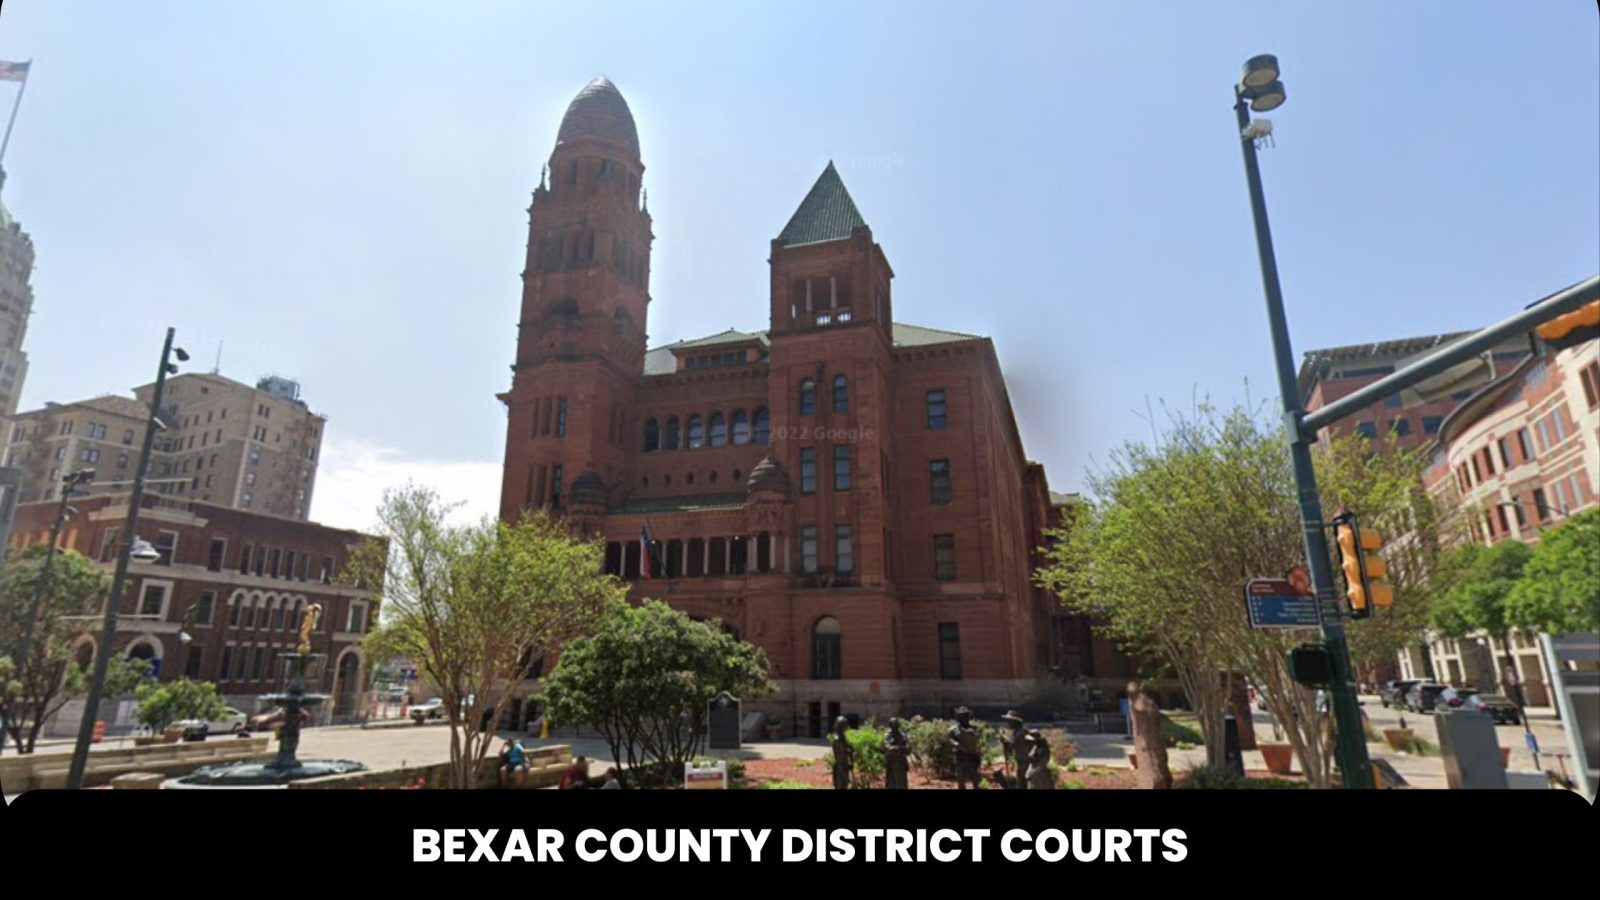 Bexar County District Courts